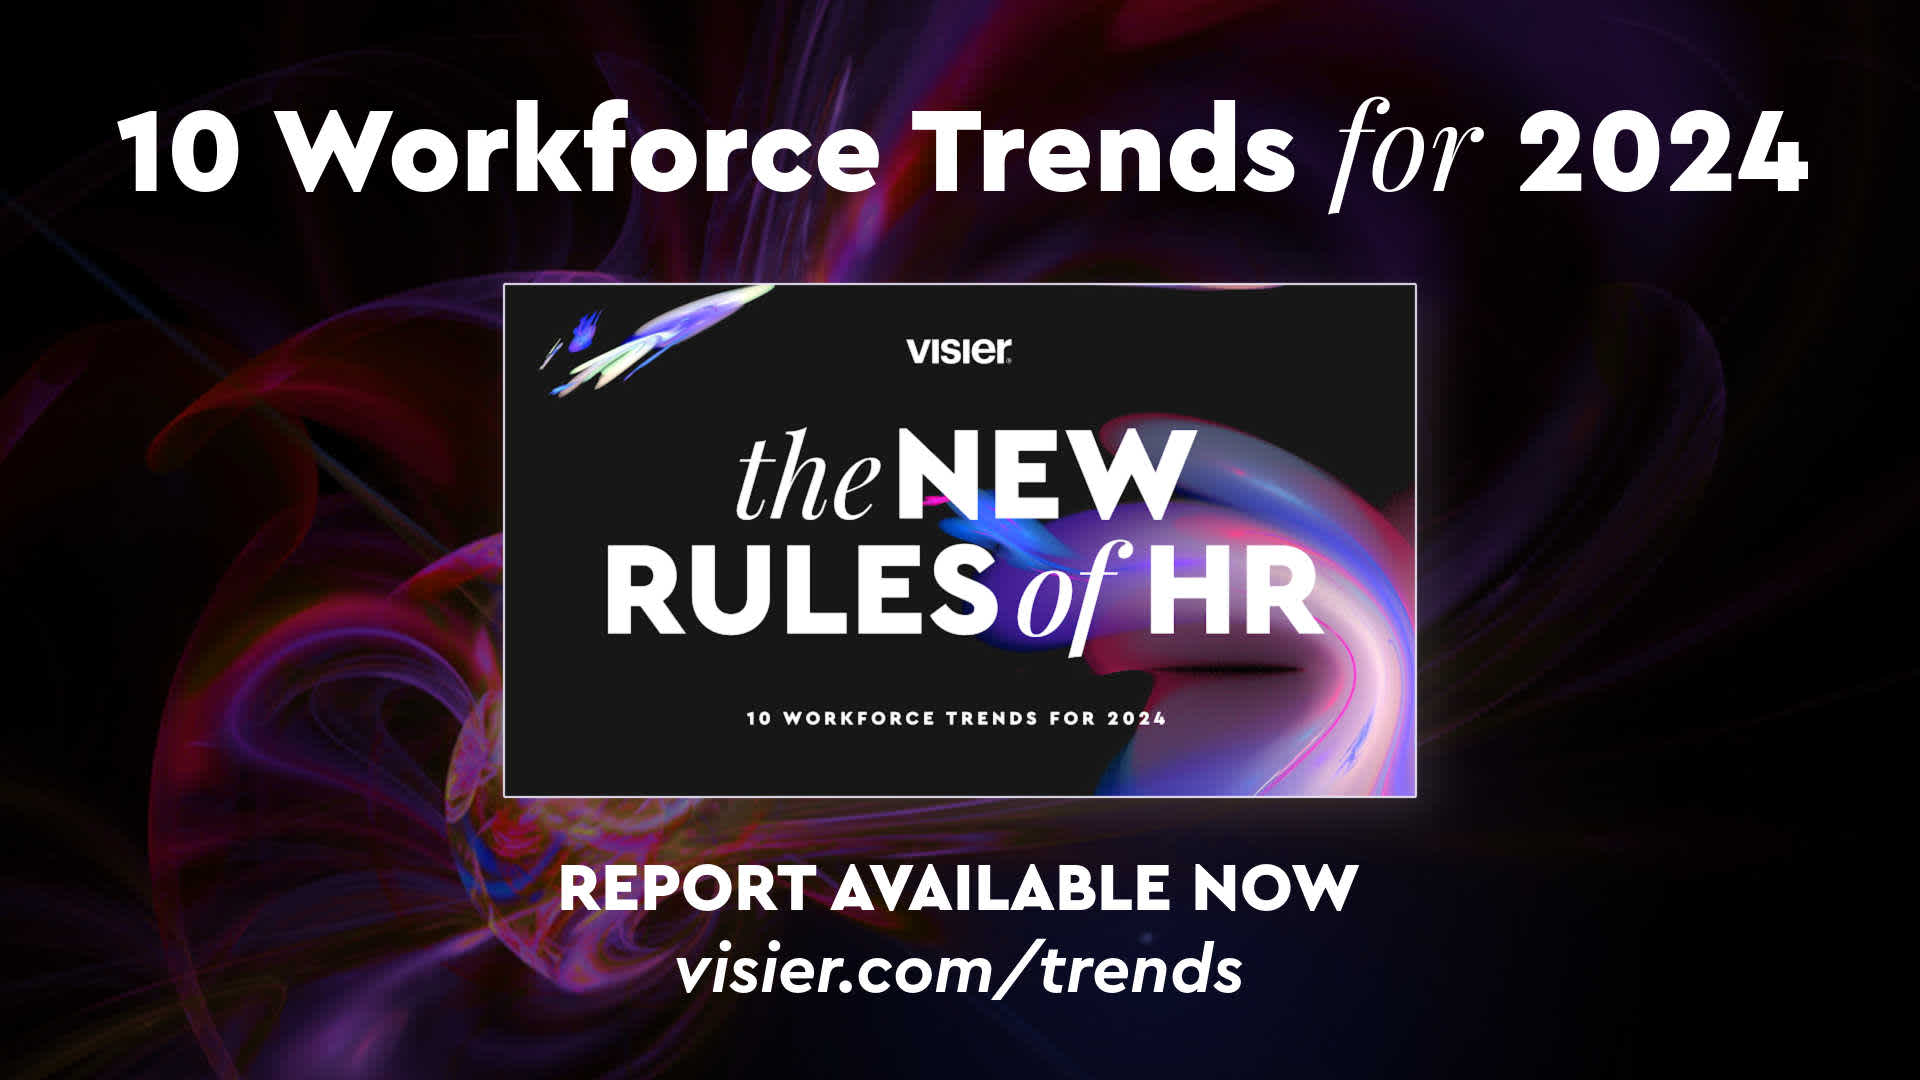 [VIDEO] Trends 2024 New Rules of HR Teaser